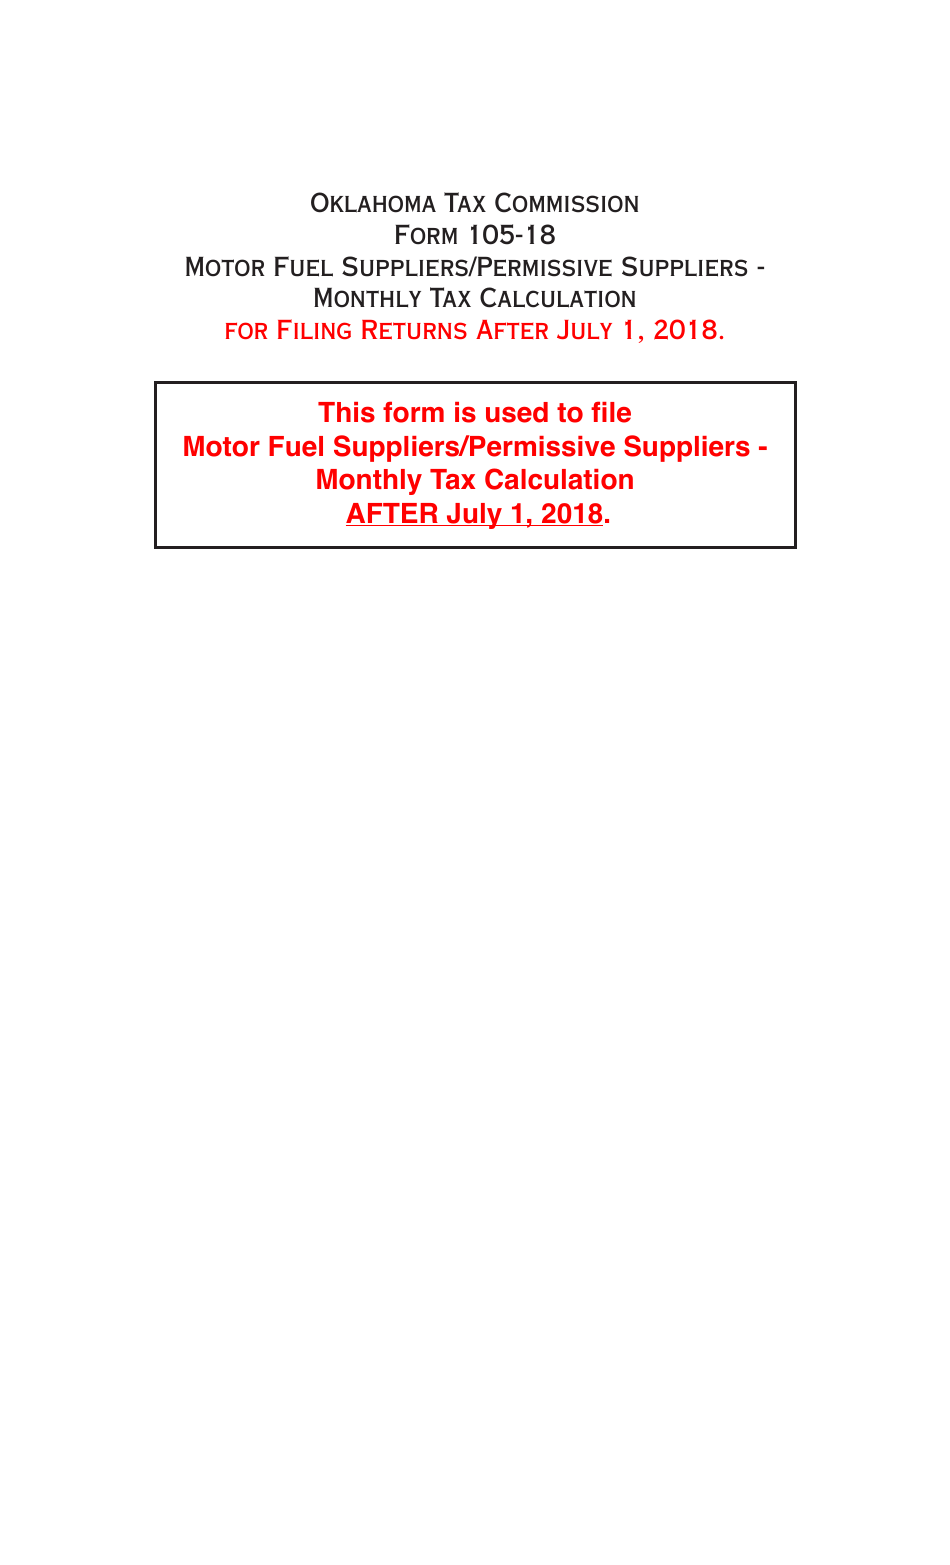 OTC Form DST-205 (105-18) Motor Fuel Suppliers / Permissive Suppliers - Monthly Tax Calculation - Oklahoma, Page 1